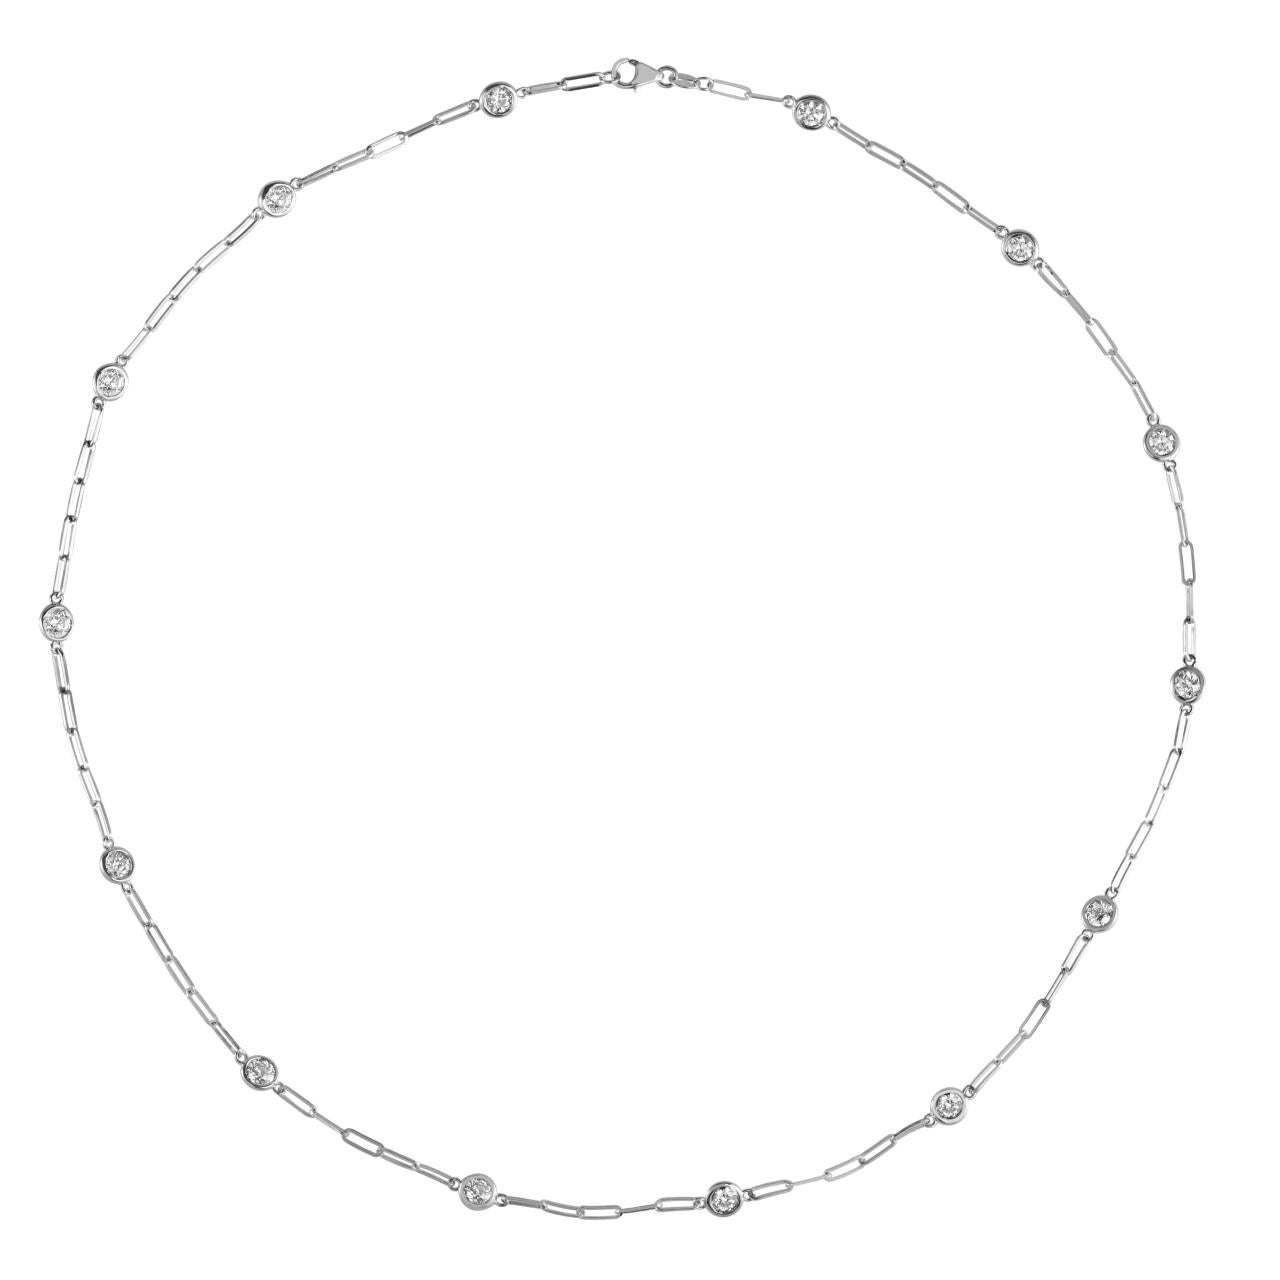 Taille ronde 1.00 Carat Diamond by the Yard Paperclip Necklace NEW STYLE 14K White Gold 18'' (Collier trombone en or blanc 14K) en vente